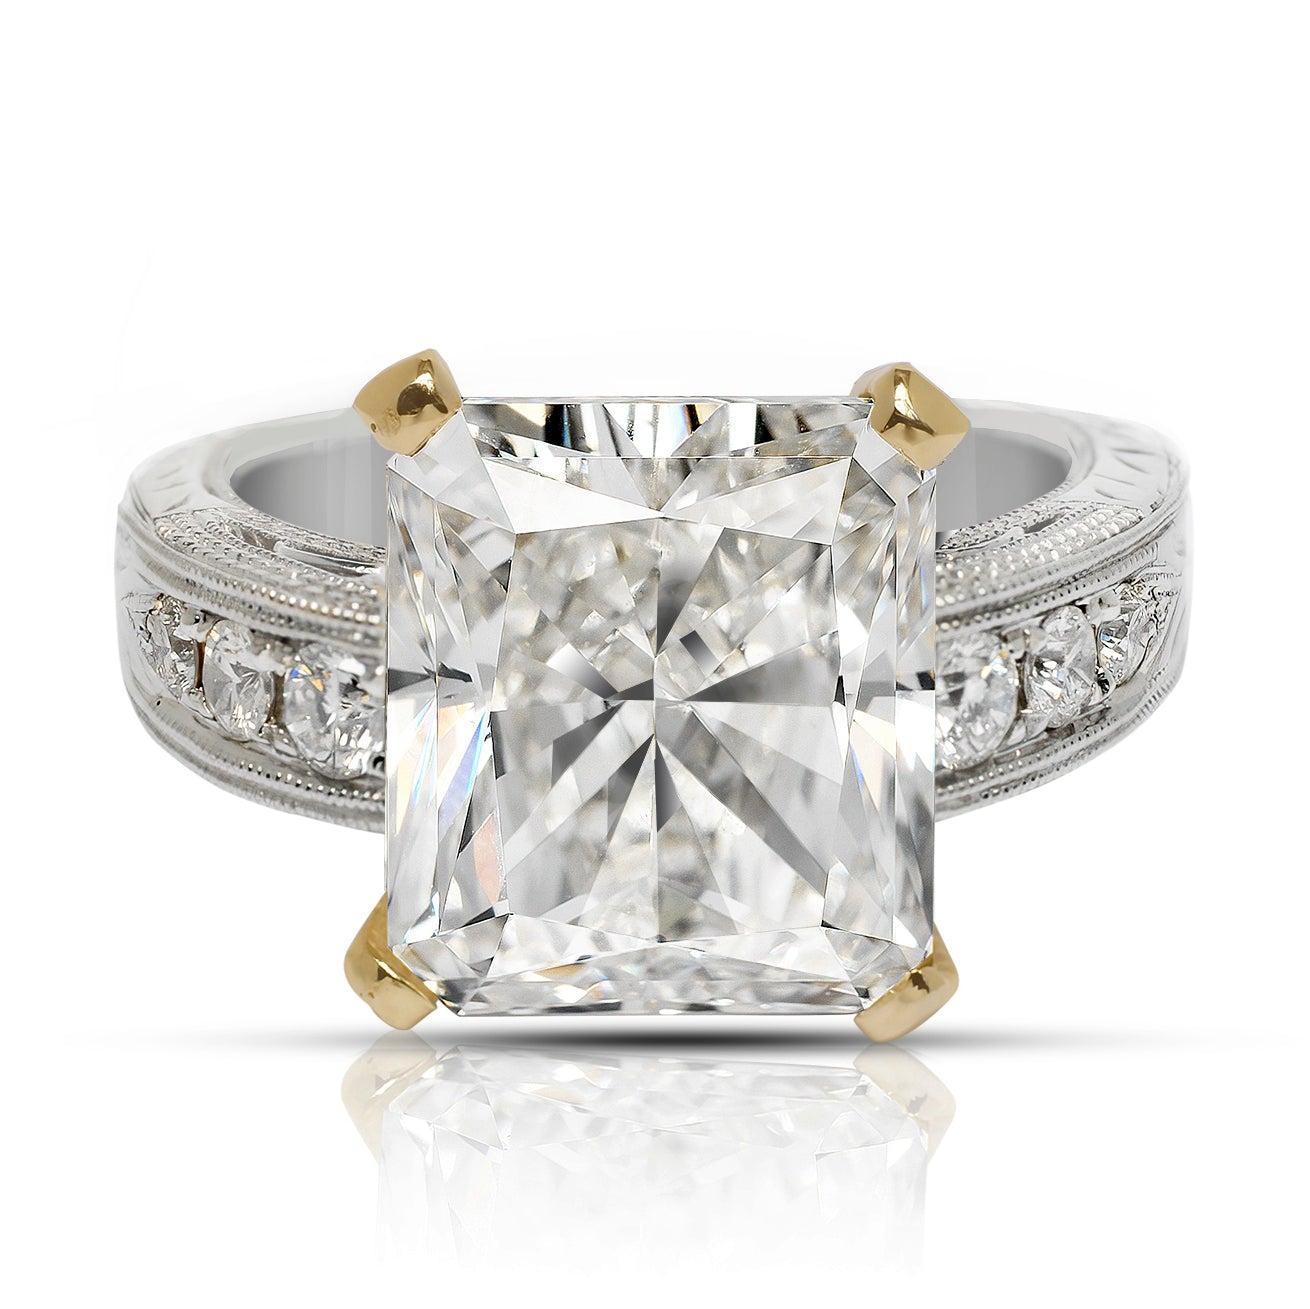 QUEEN DIAMOND ENGAGEMENT 18K GOLD RING BY MIKE NEKTA

CERTIFIED

Center Diamond:
Carat Weight: 8 Carats
Color: F
Clarity: VS2
Style:  RADIANT - SQUARE MODIFIED BRILLIANT
Approximate Measurements: 11.7 x 10 x 7 mm

Ring:
Metal: 18K WHITE & YELLOW